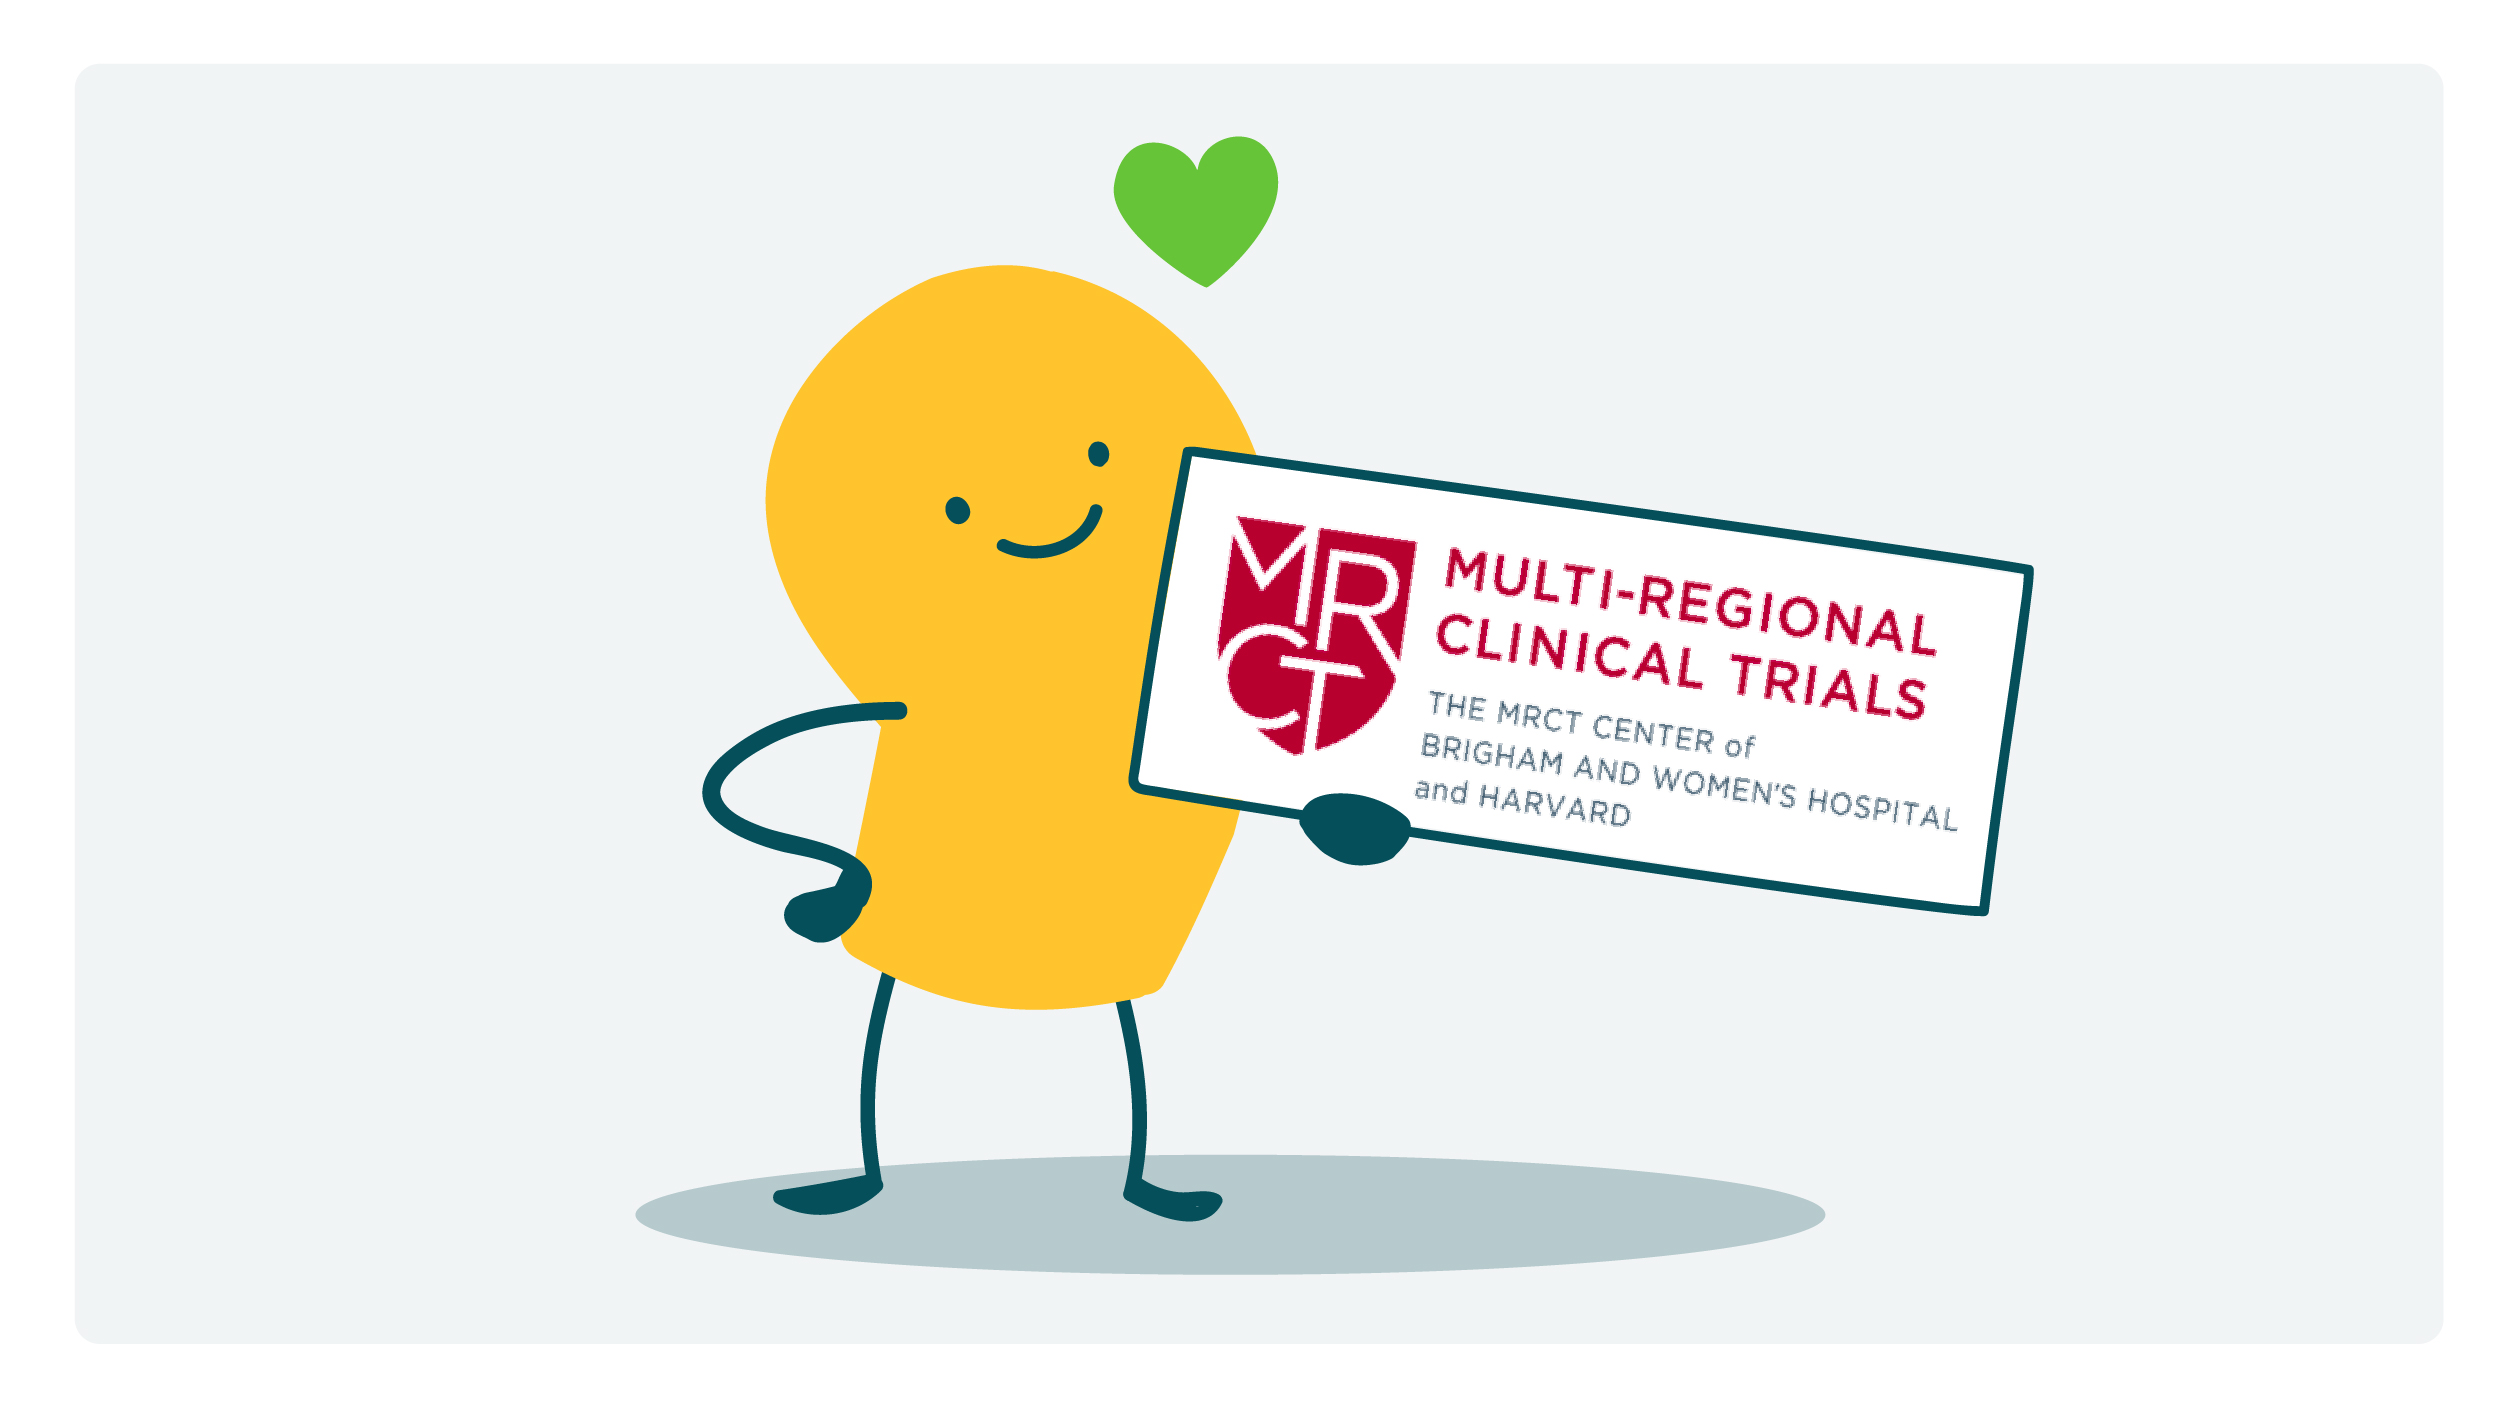 A doodle holds up a sign with the Multi-Regional Clinical Trials logo.